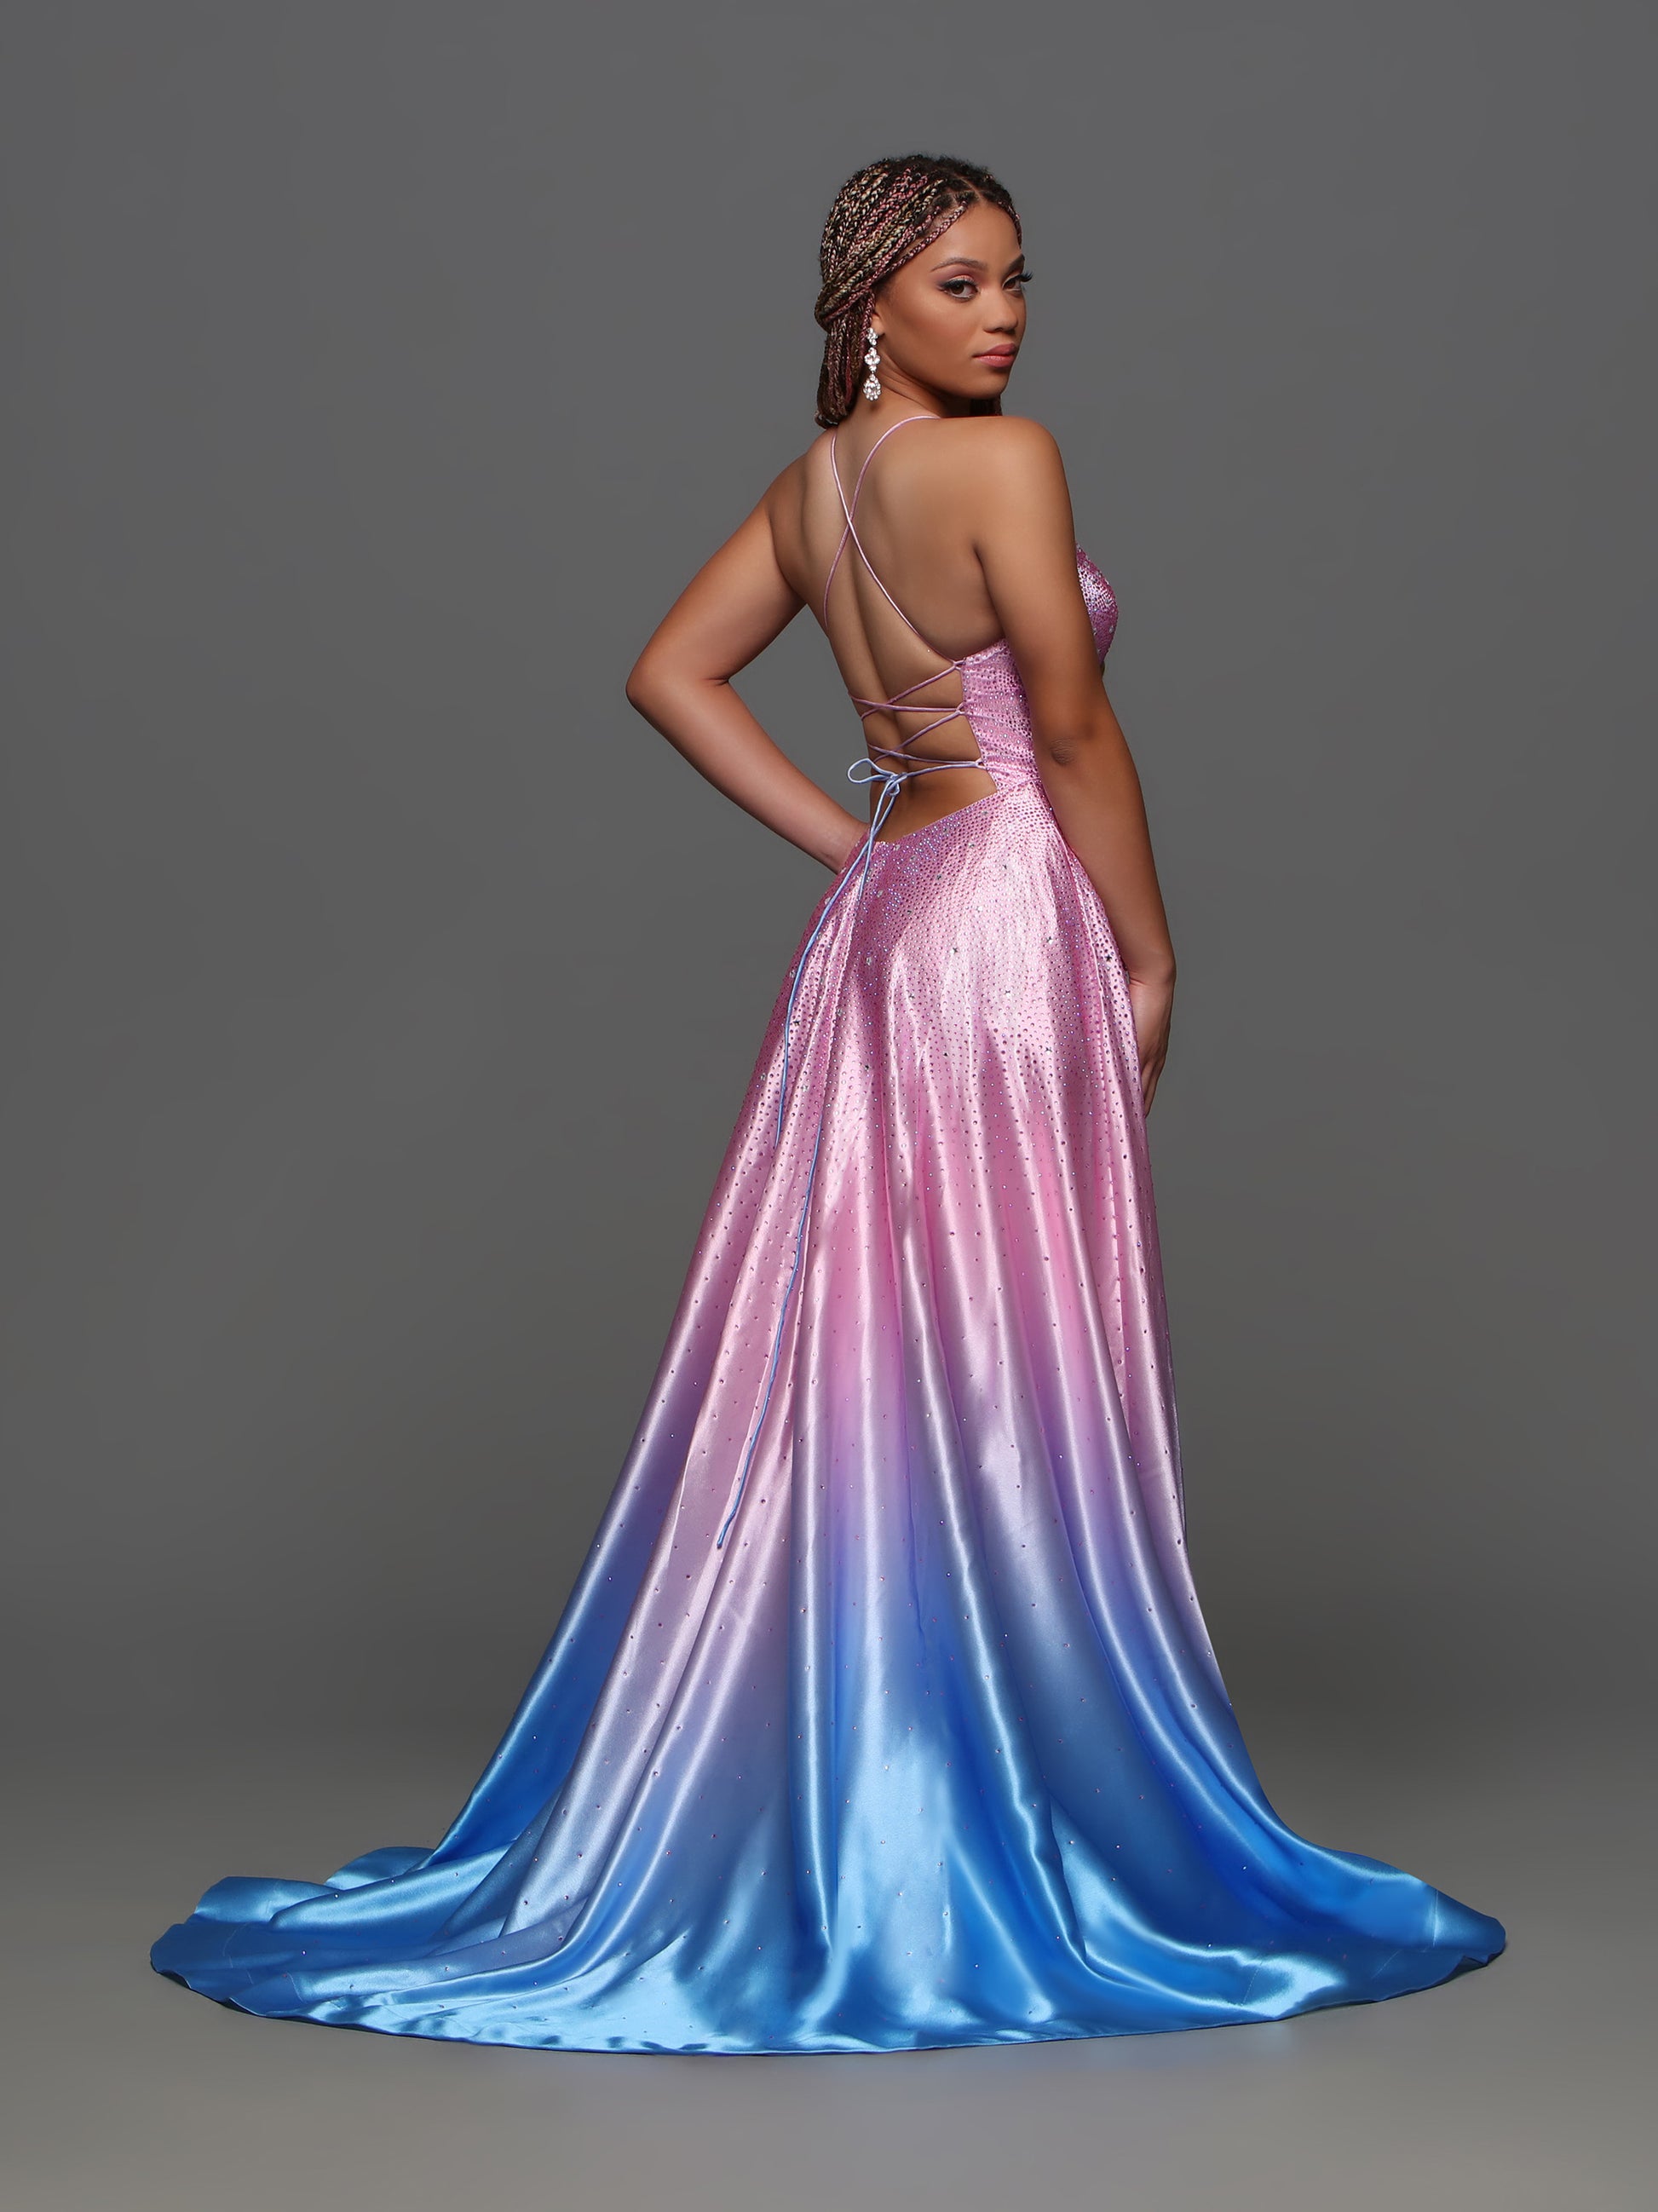 Elevate your prom style with the Candice Wang 72386 Pink Ombre A Line Maxi Slit Prom Dress. The backless design and corset detailing flatter your figure, while the crystal embellishments add a touch of glamour. The ombre color scheme creates a unique and stylish look.  Sizes: 0-16  Colors: Pink Ombre